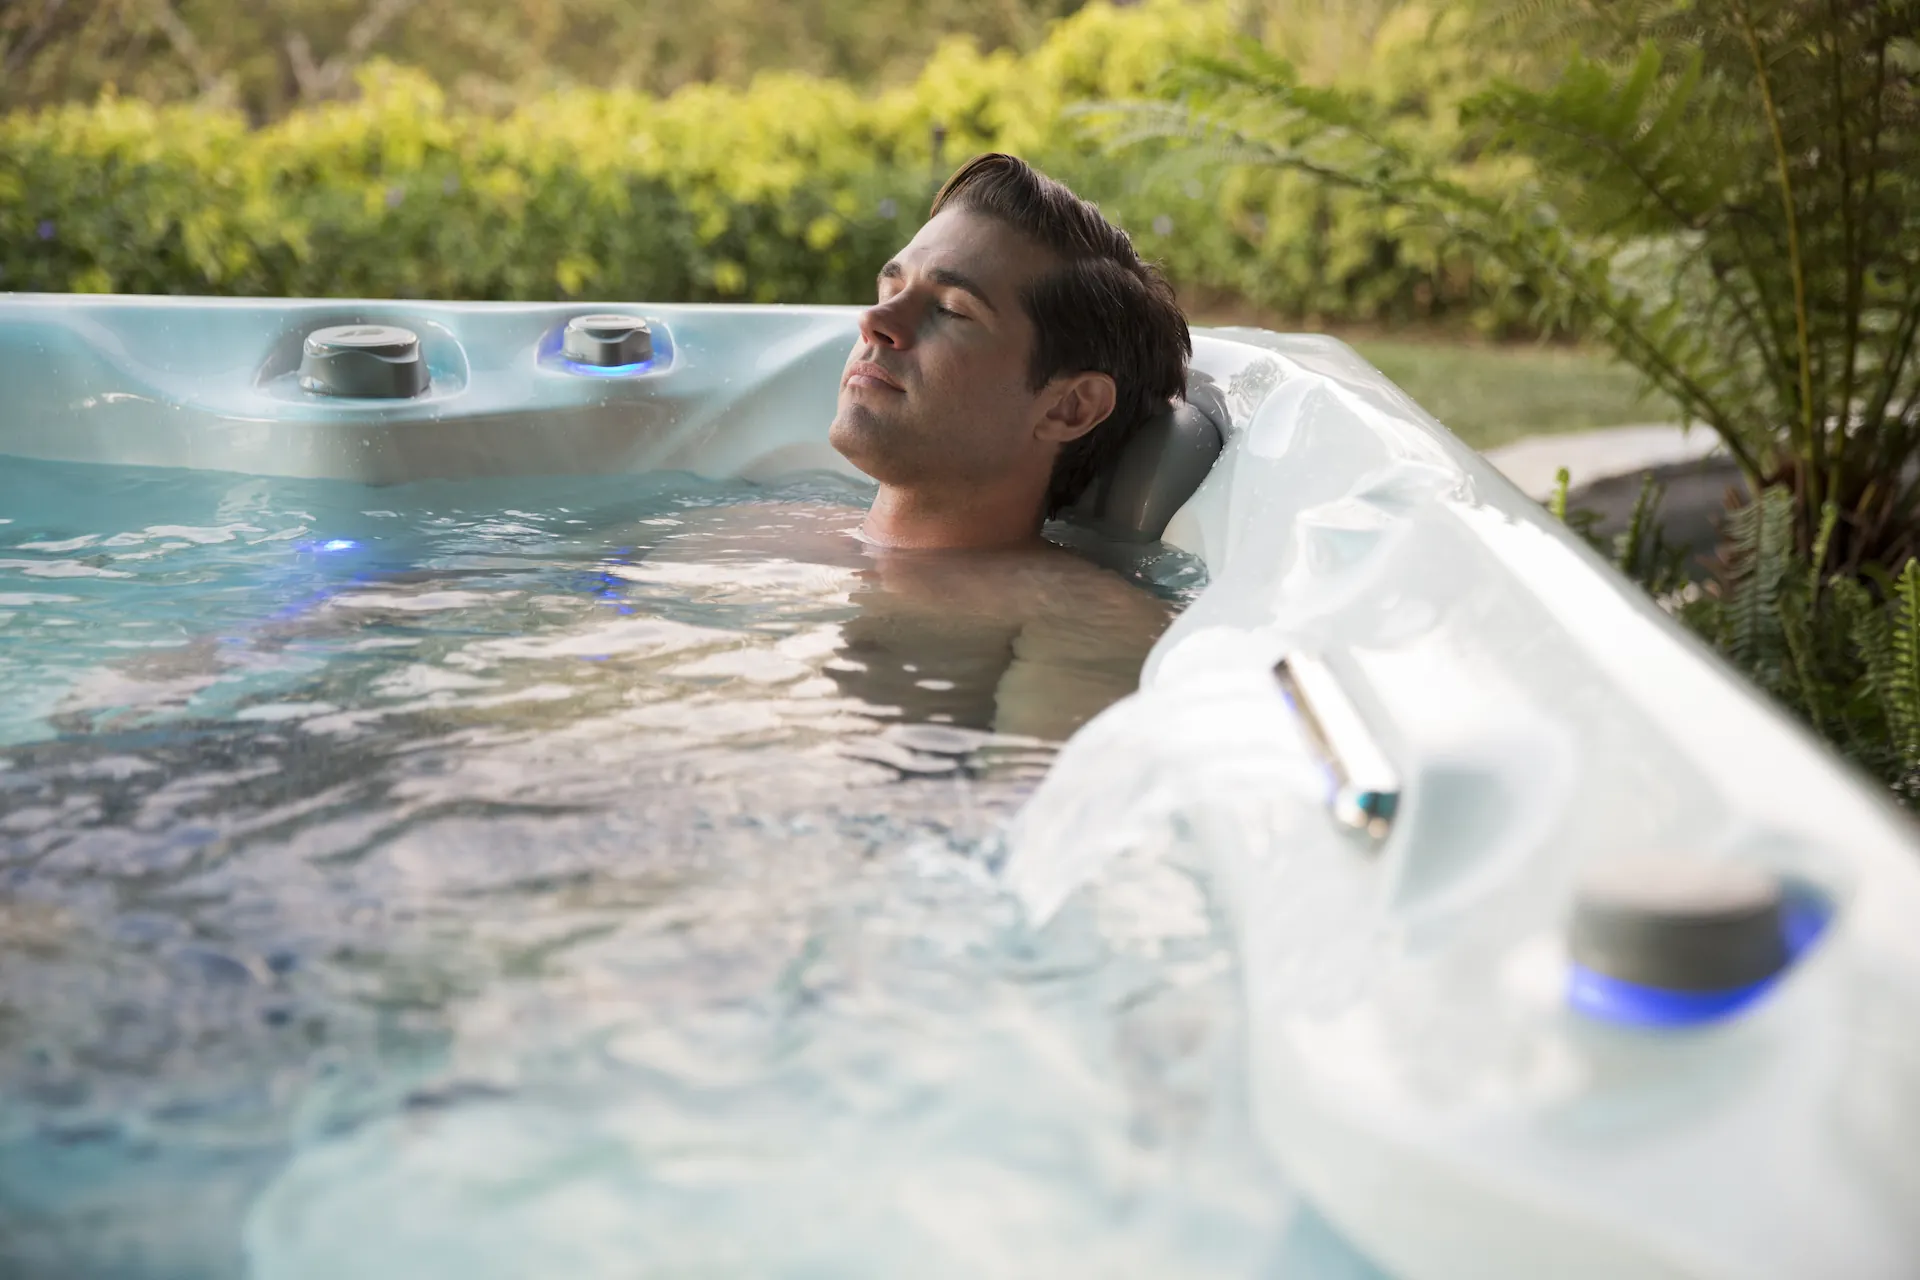 A bather sits in a corner seat of a hot tub outdoors in the daylight. Your previous experience in hot tubs helps answer the question "How often should I use a hot tub?"